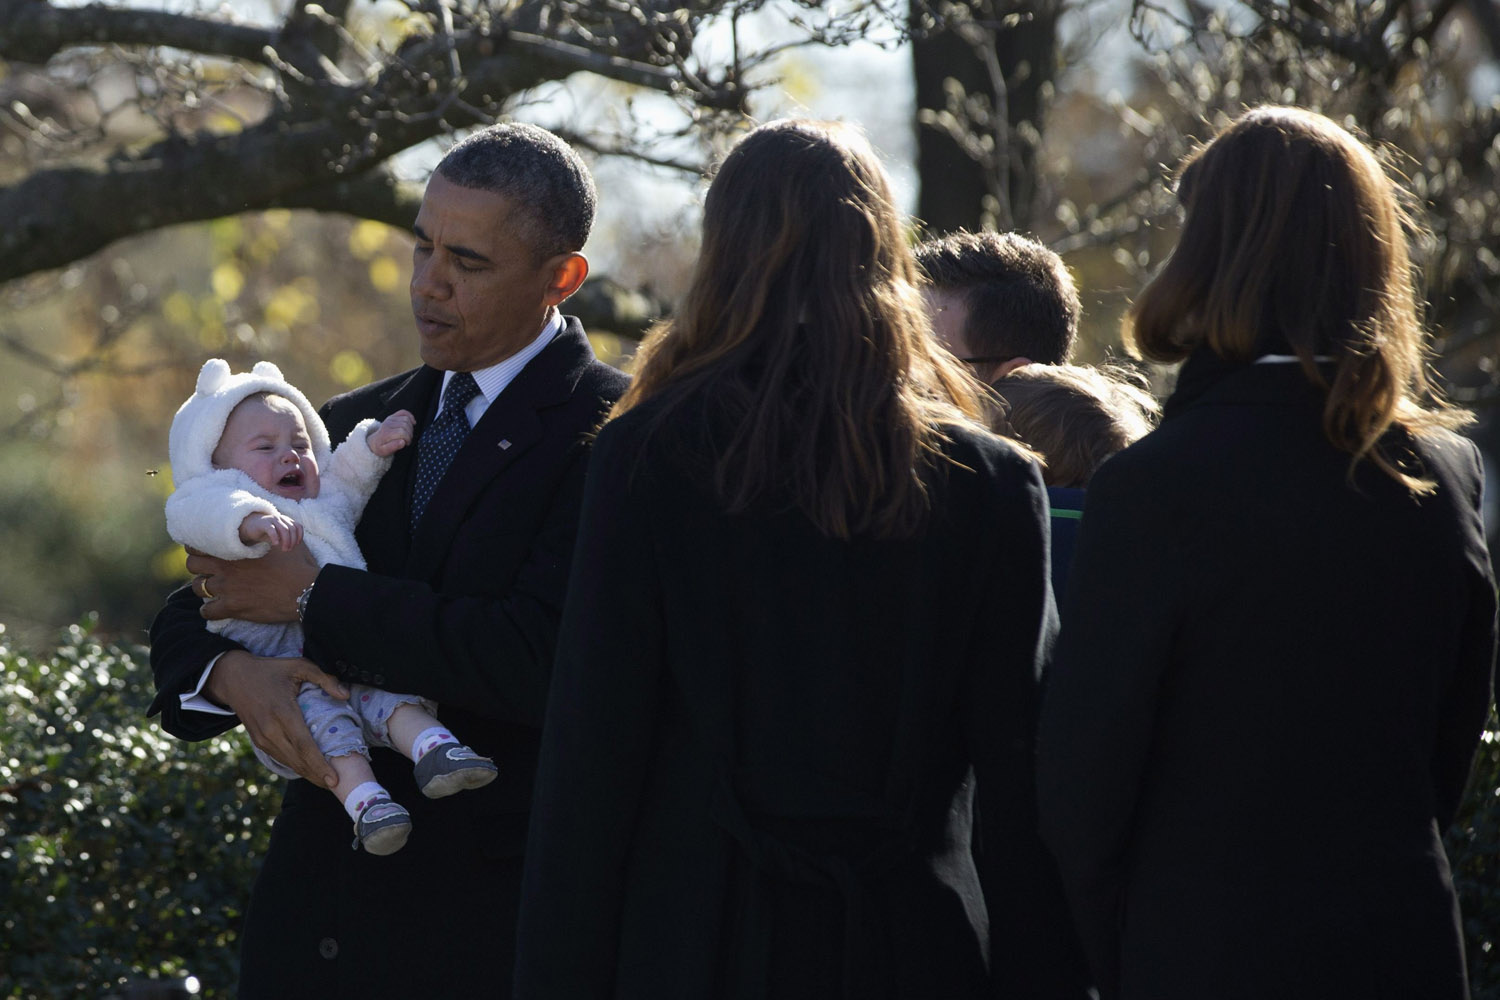 U.S. President Obama holds baby, part of the Kennedy extended family, during a wreath laying in honor of assassinated U.S. President John F. Kennedy at Arlington National Cemetery near Washington